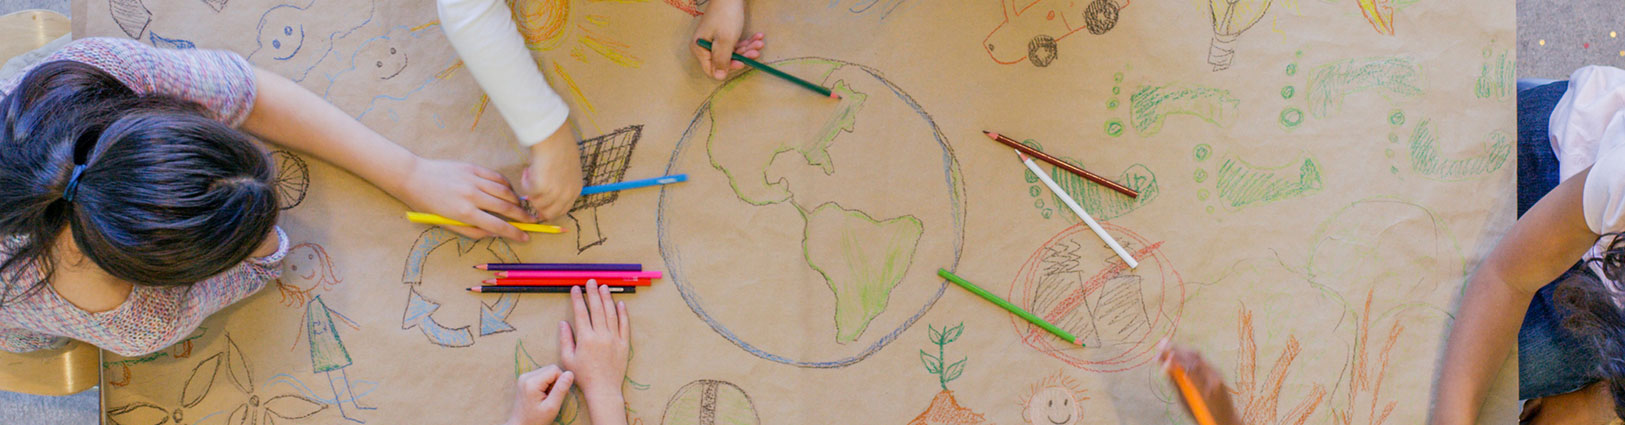 Children drawing with colored pencils on large piece of kraft paper